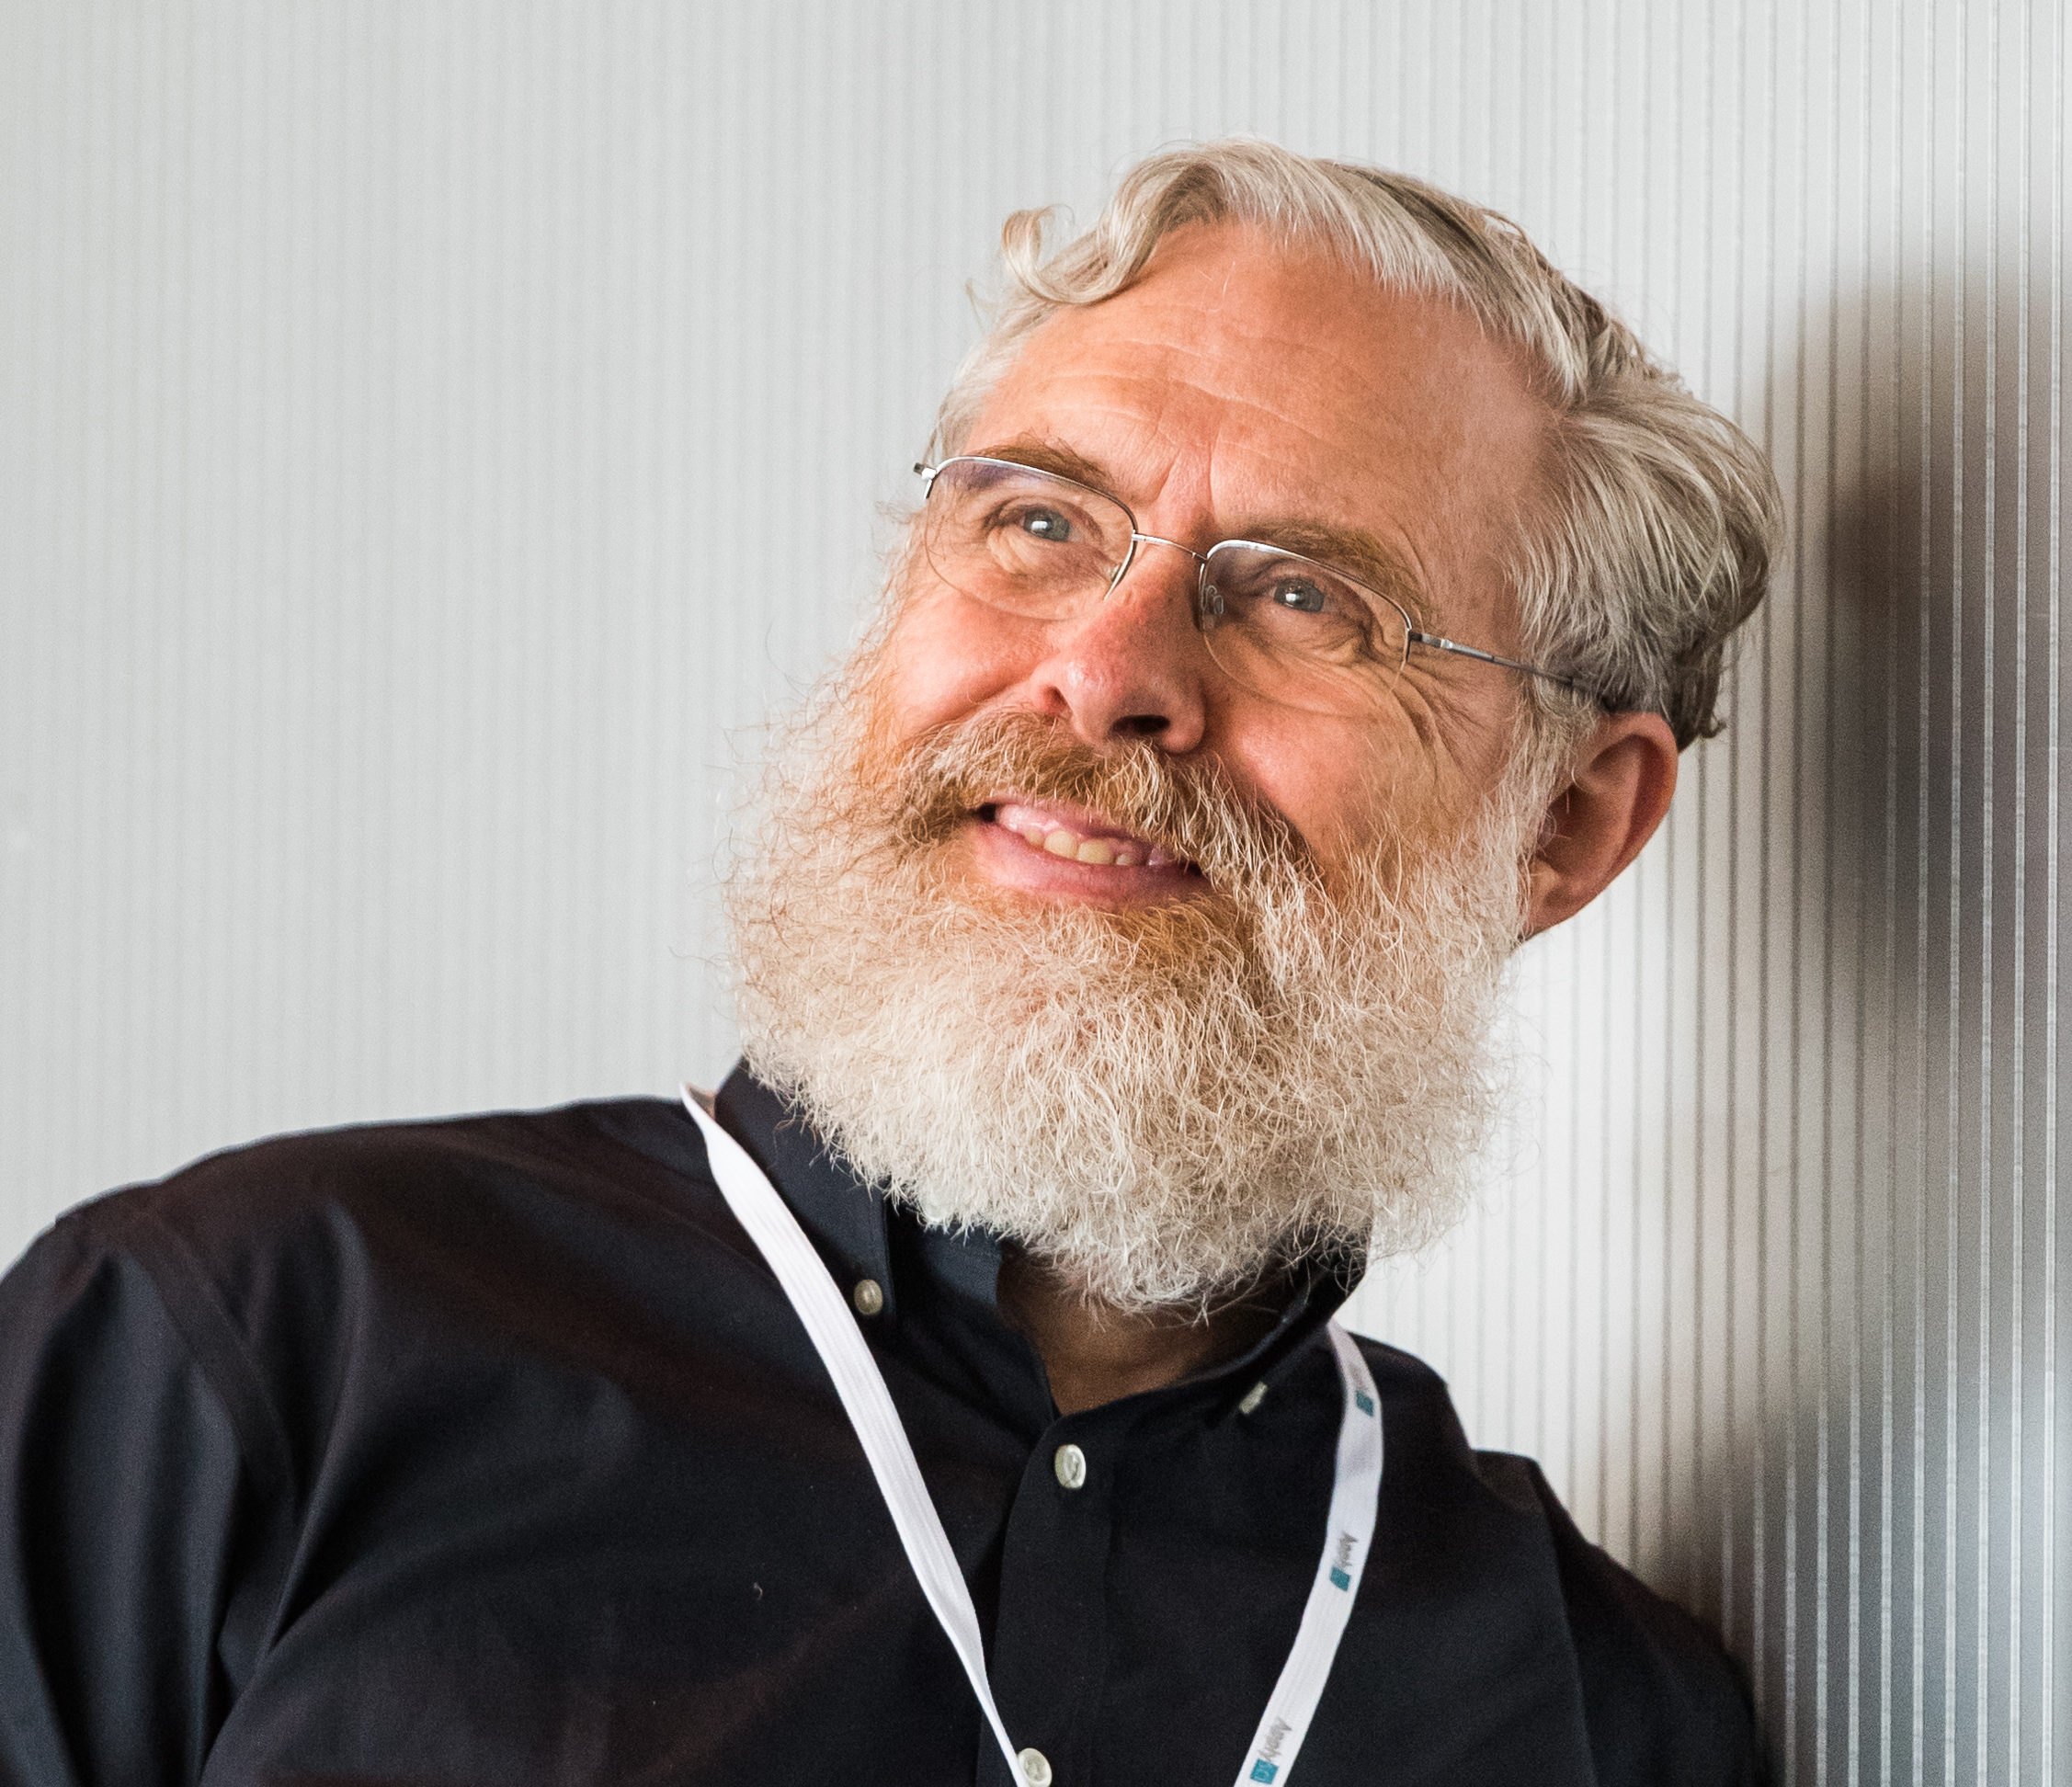 Video: George Church on reading and writing brain structures and functions